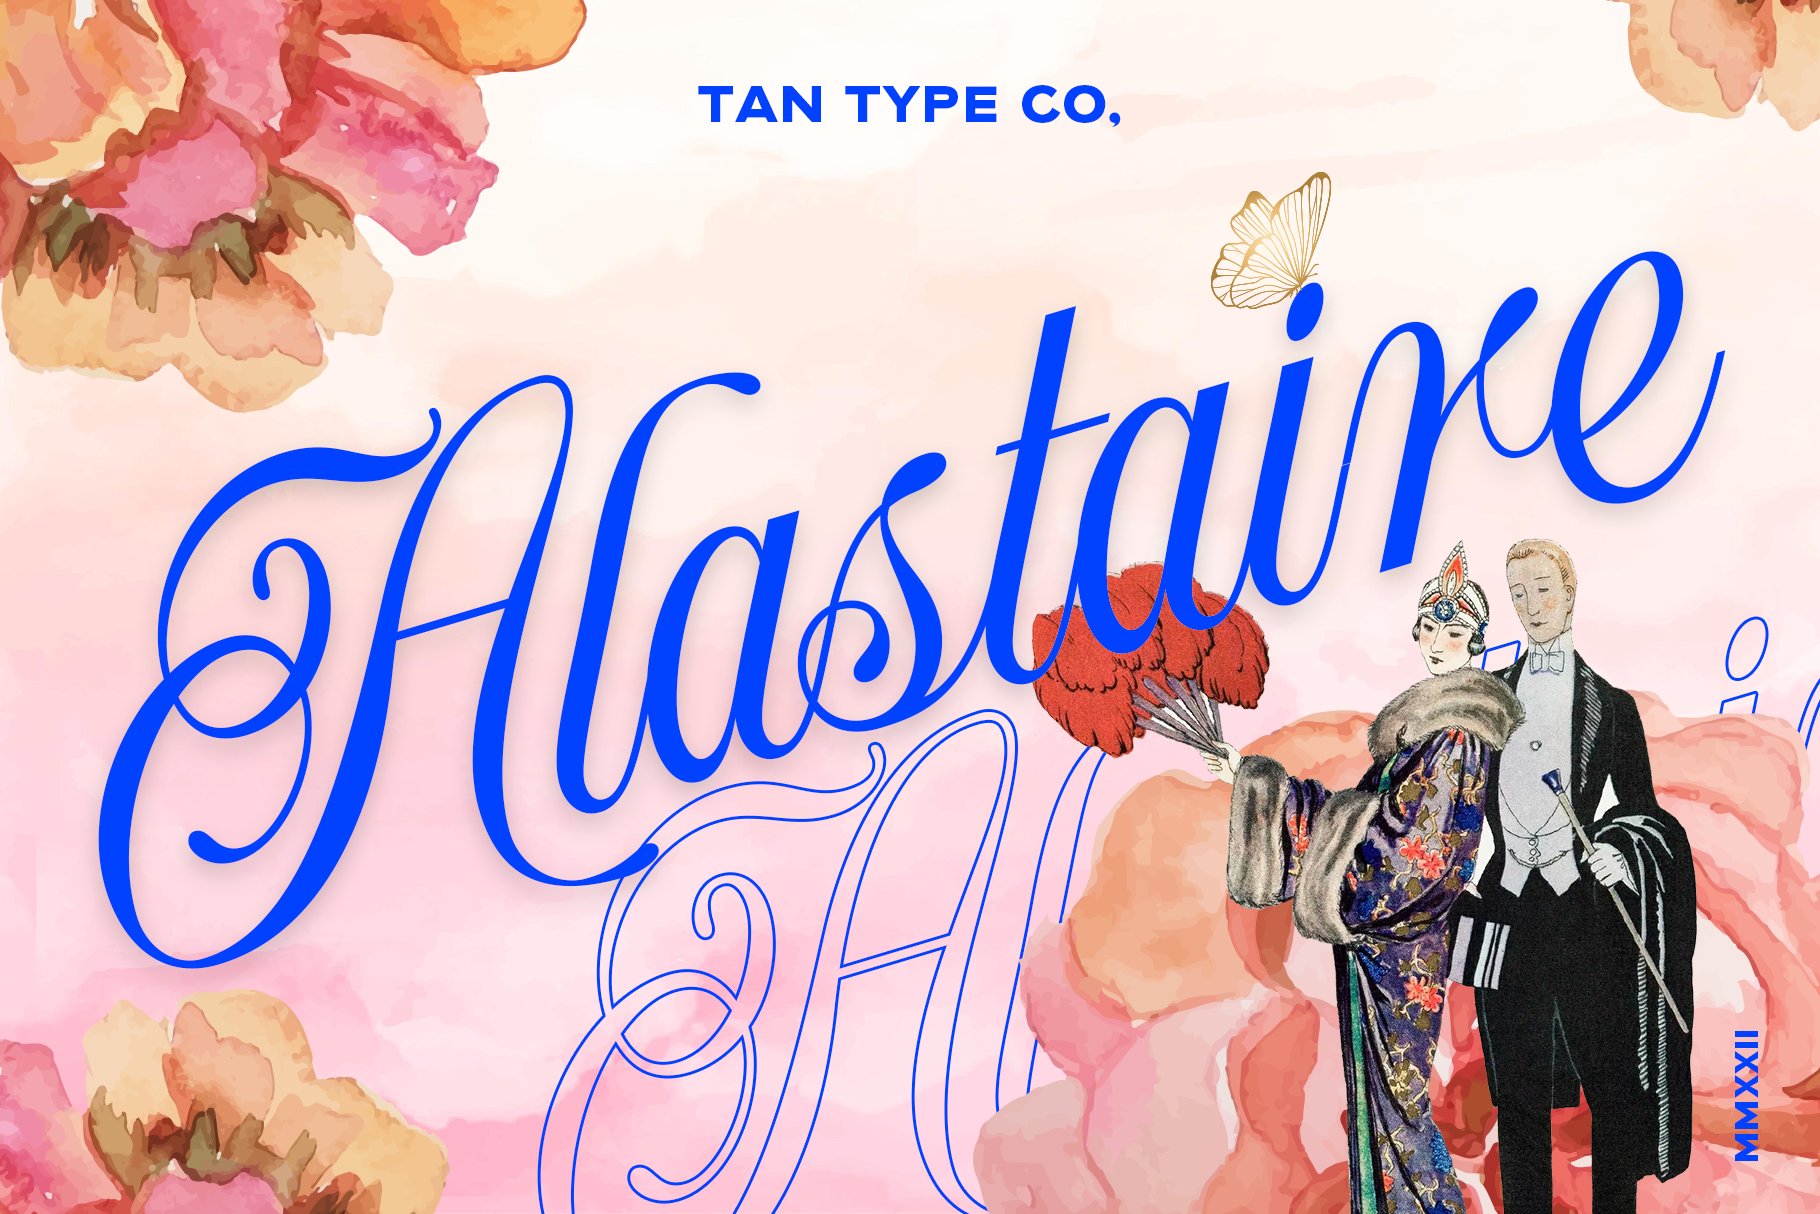 TAN - ALASTAIRE cover image.